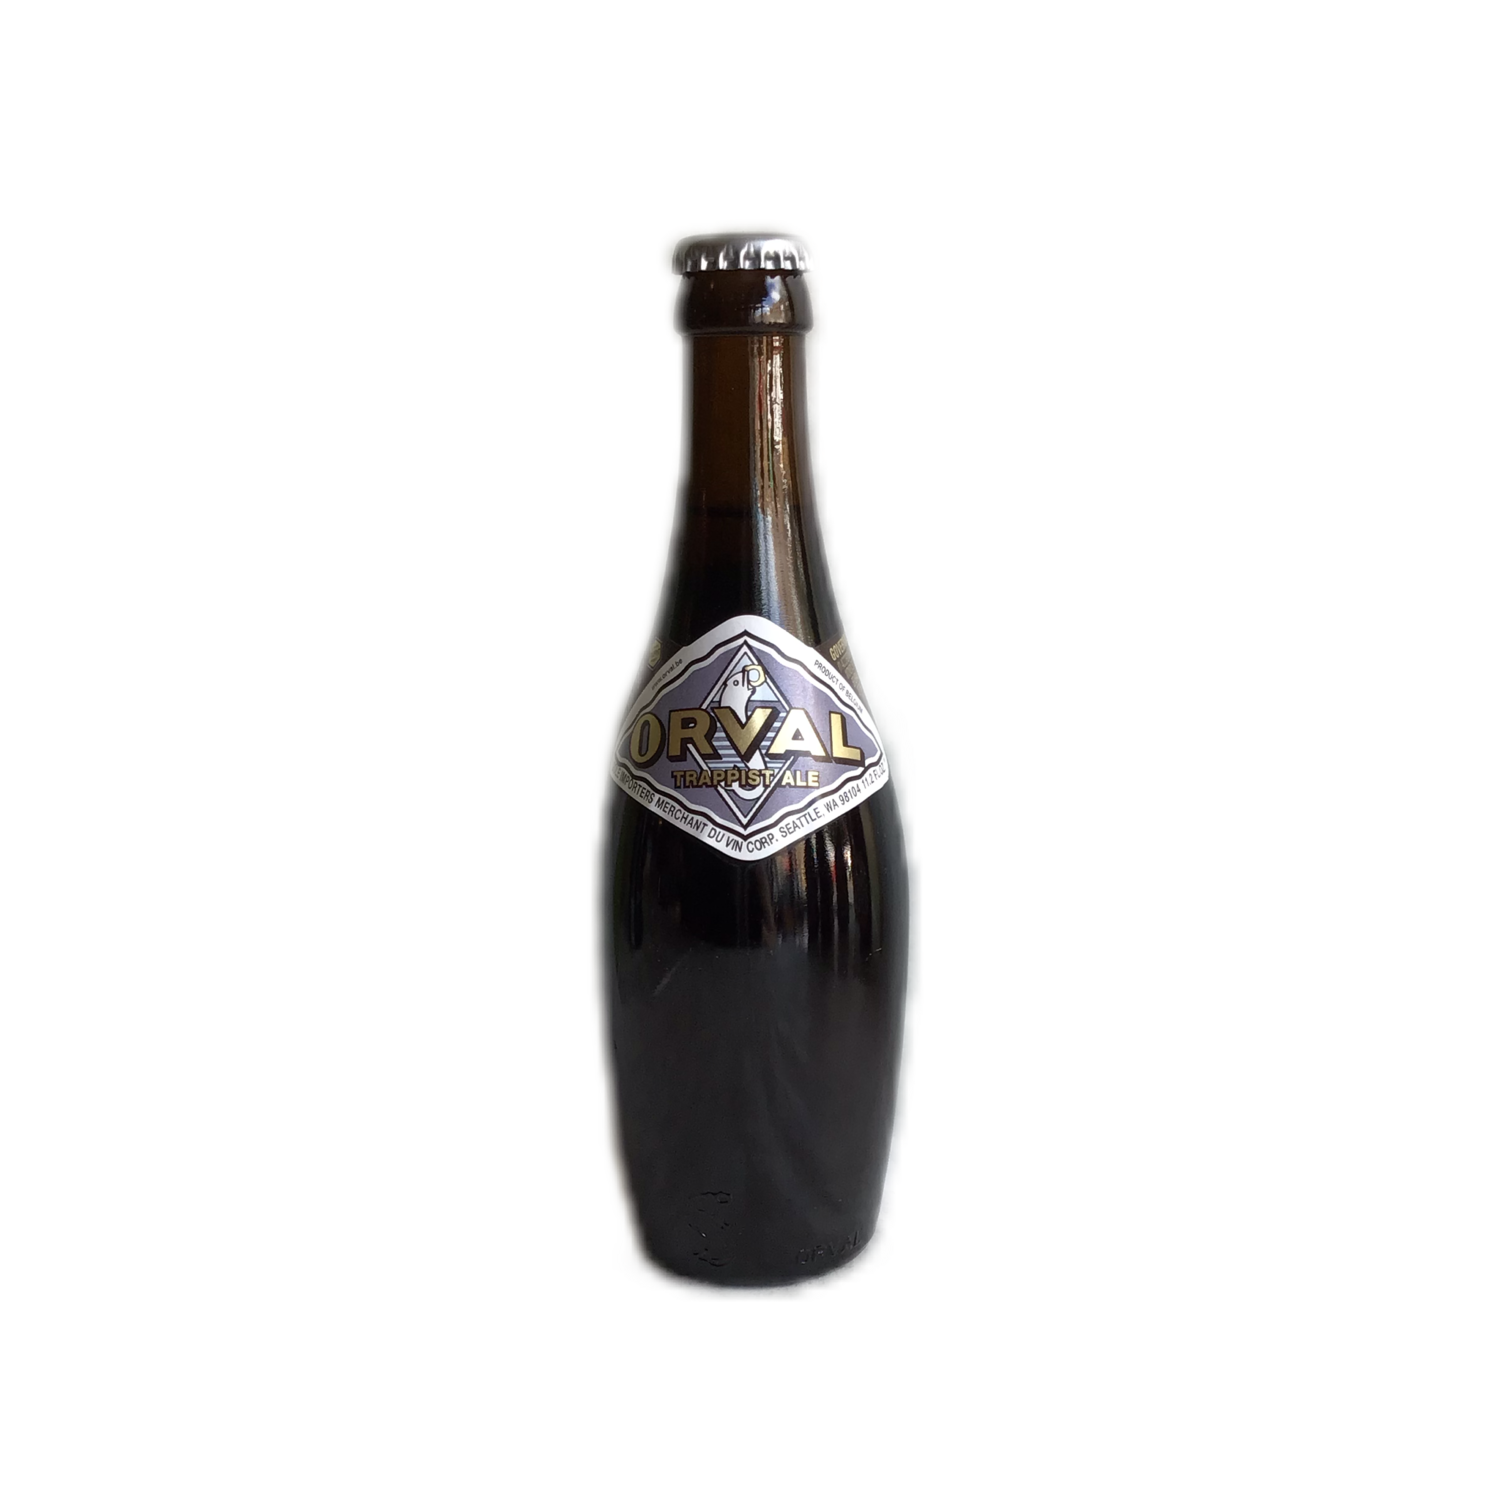 Orval Bottle PNG HD Quality